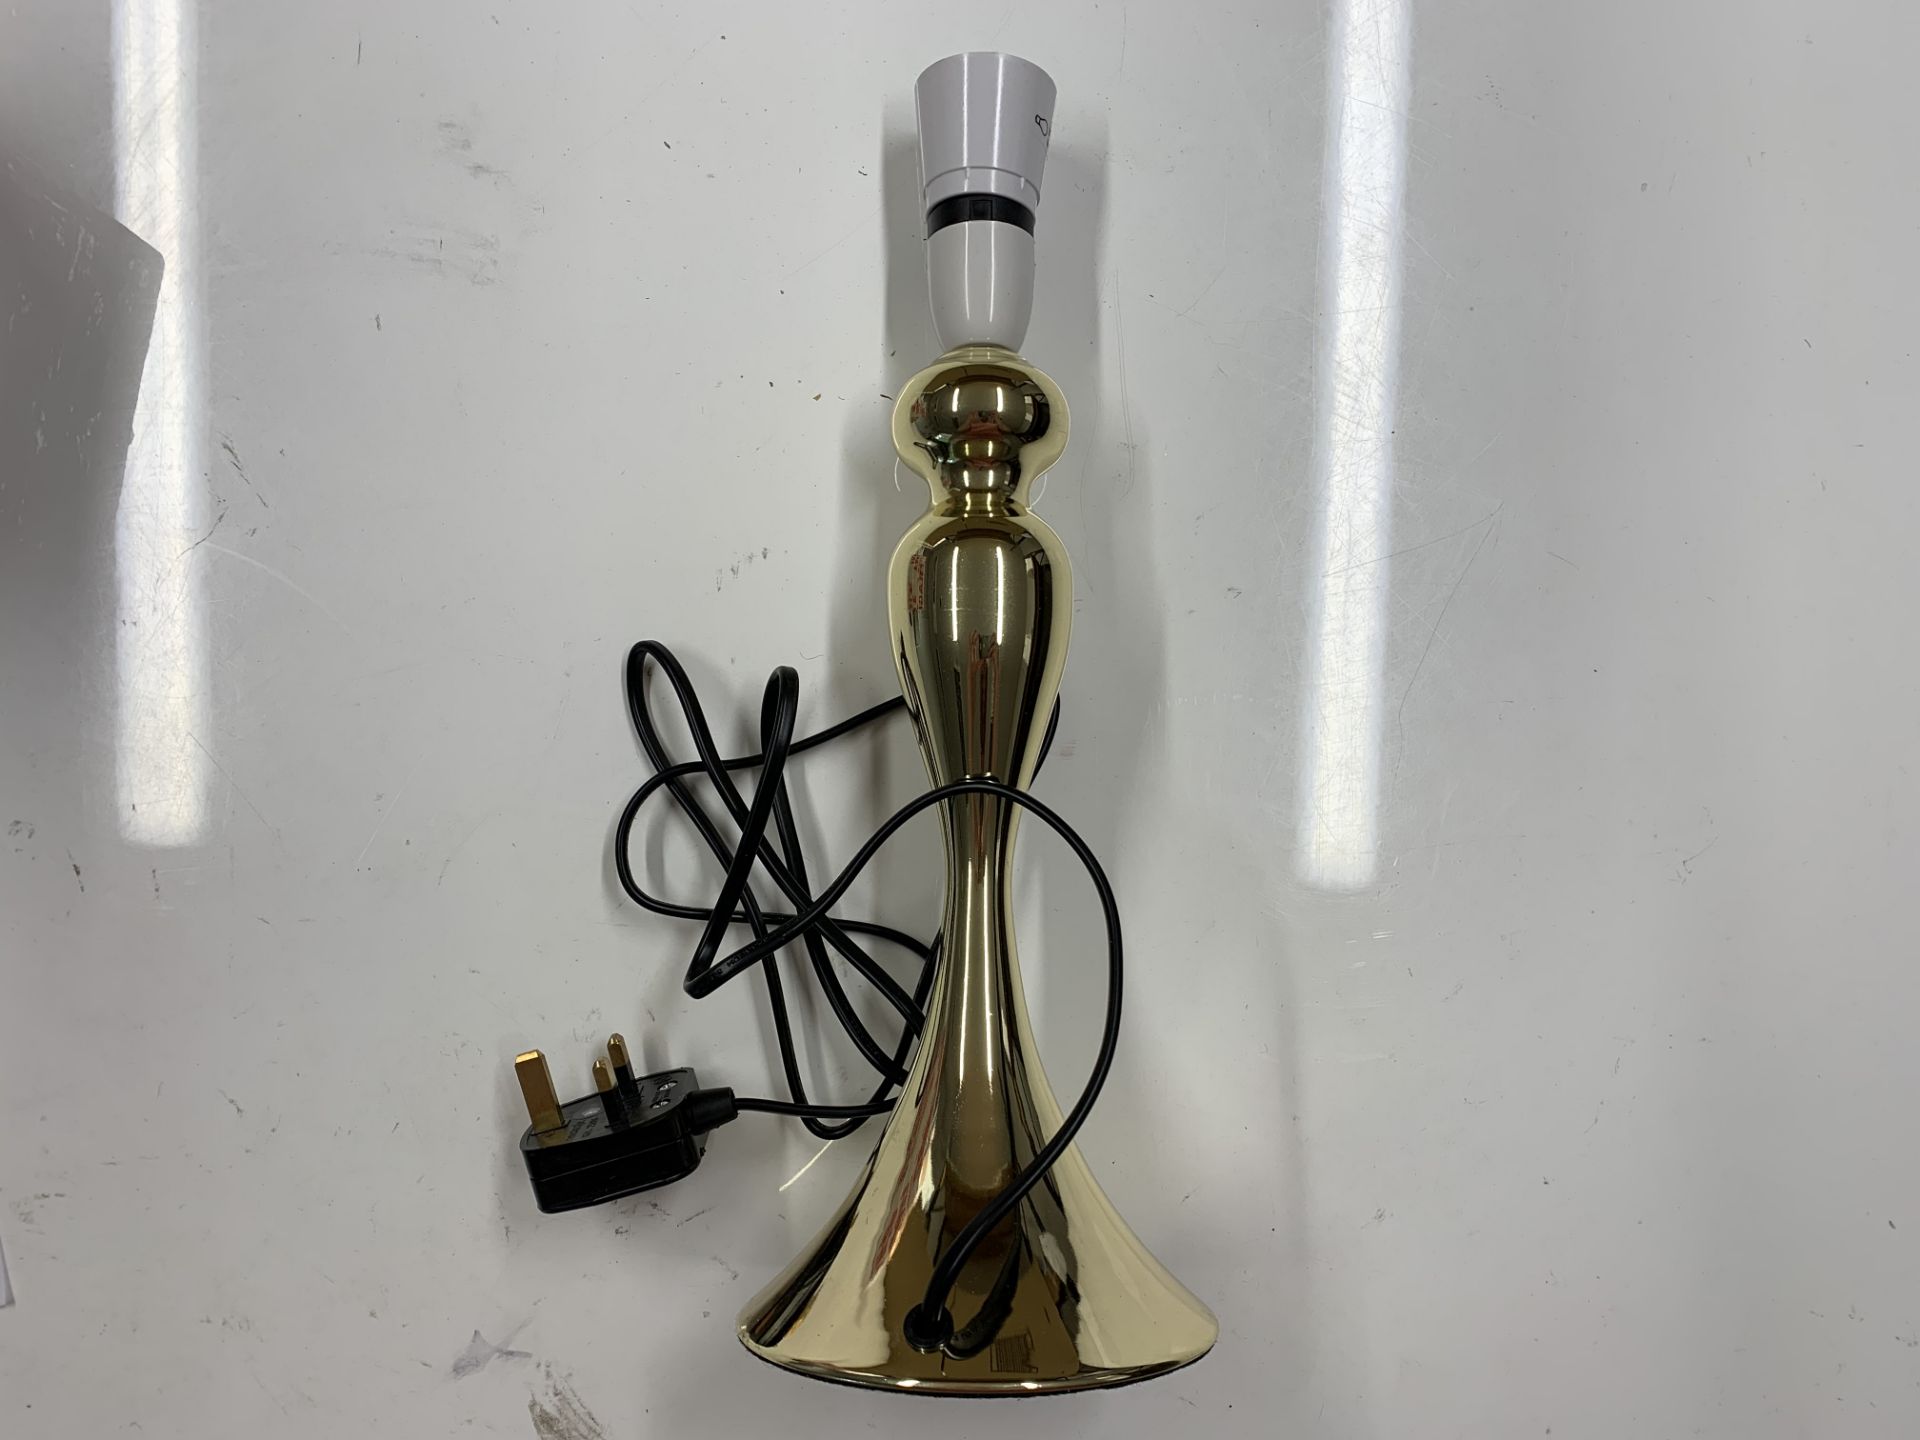 MiniSun Faulkner Spindle 34.5cm Table Lamp Base (GOLD / BASE ONLY) RRP - £23.49 (MSUN2874 - 6863/62)